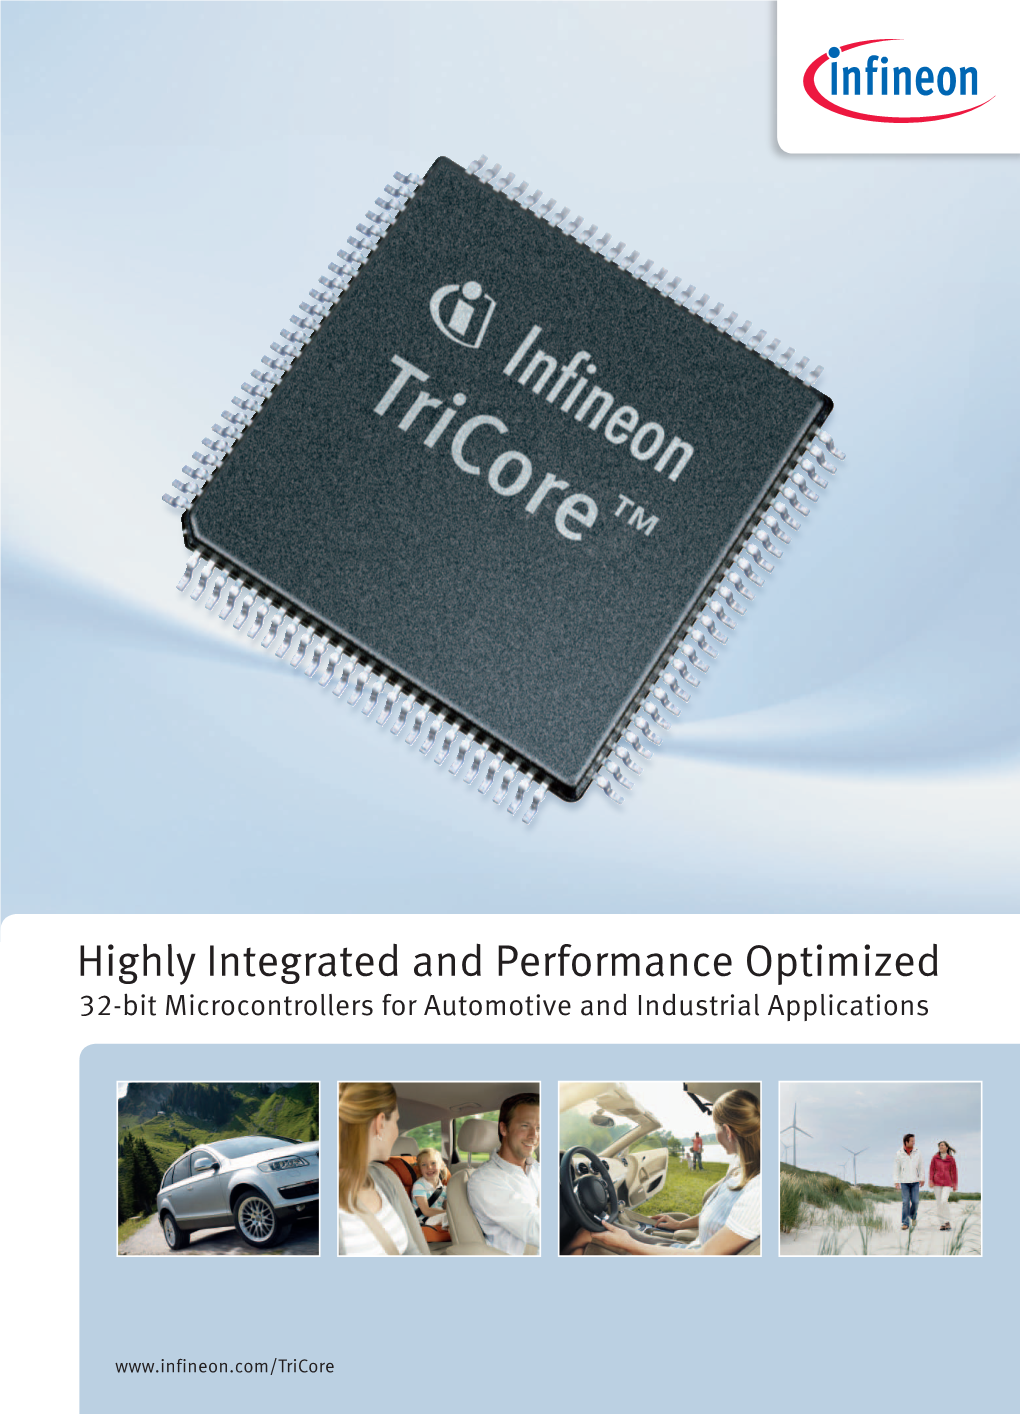 Highly Integrated and Performance Optimized 32-Bit Microcontrollers for Automotive and Industrial Applications